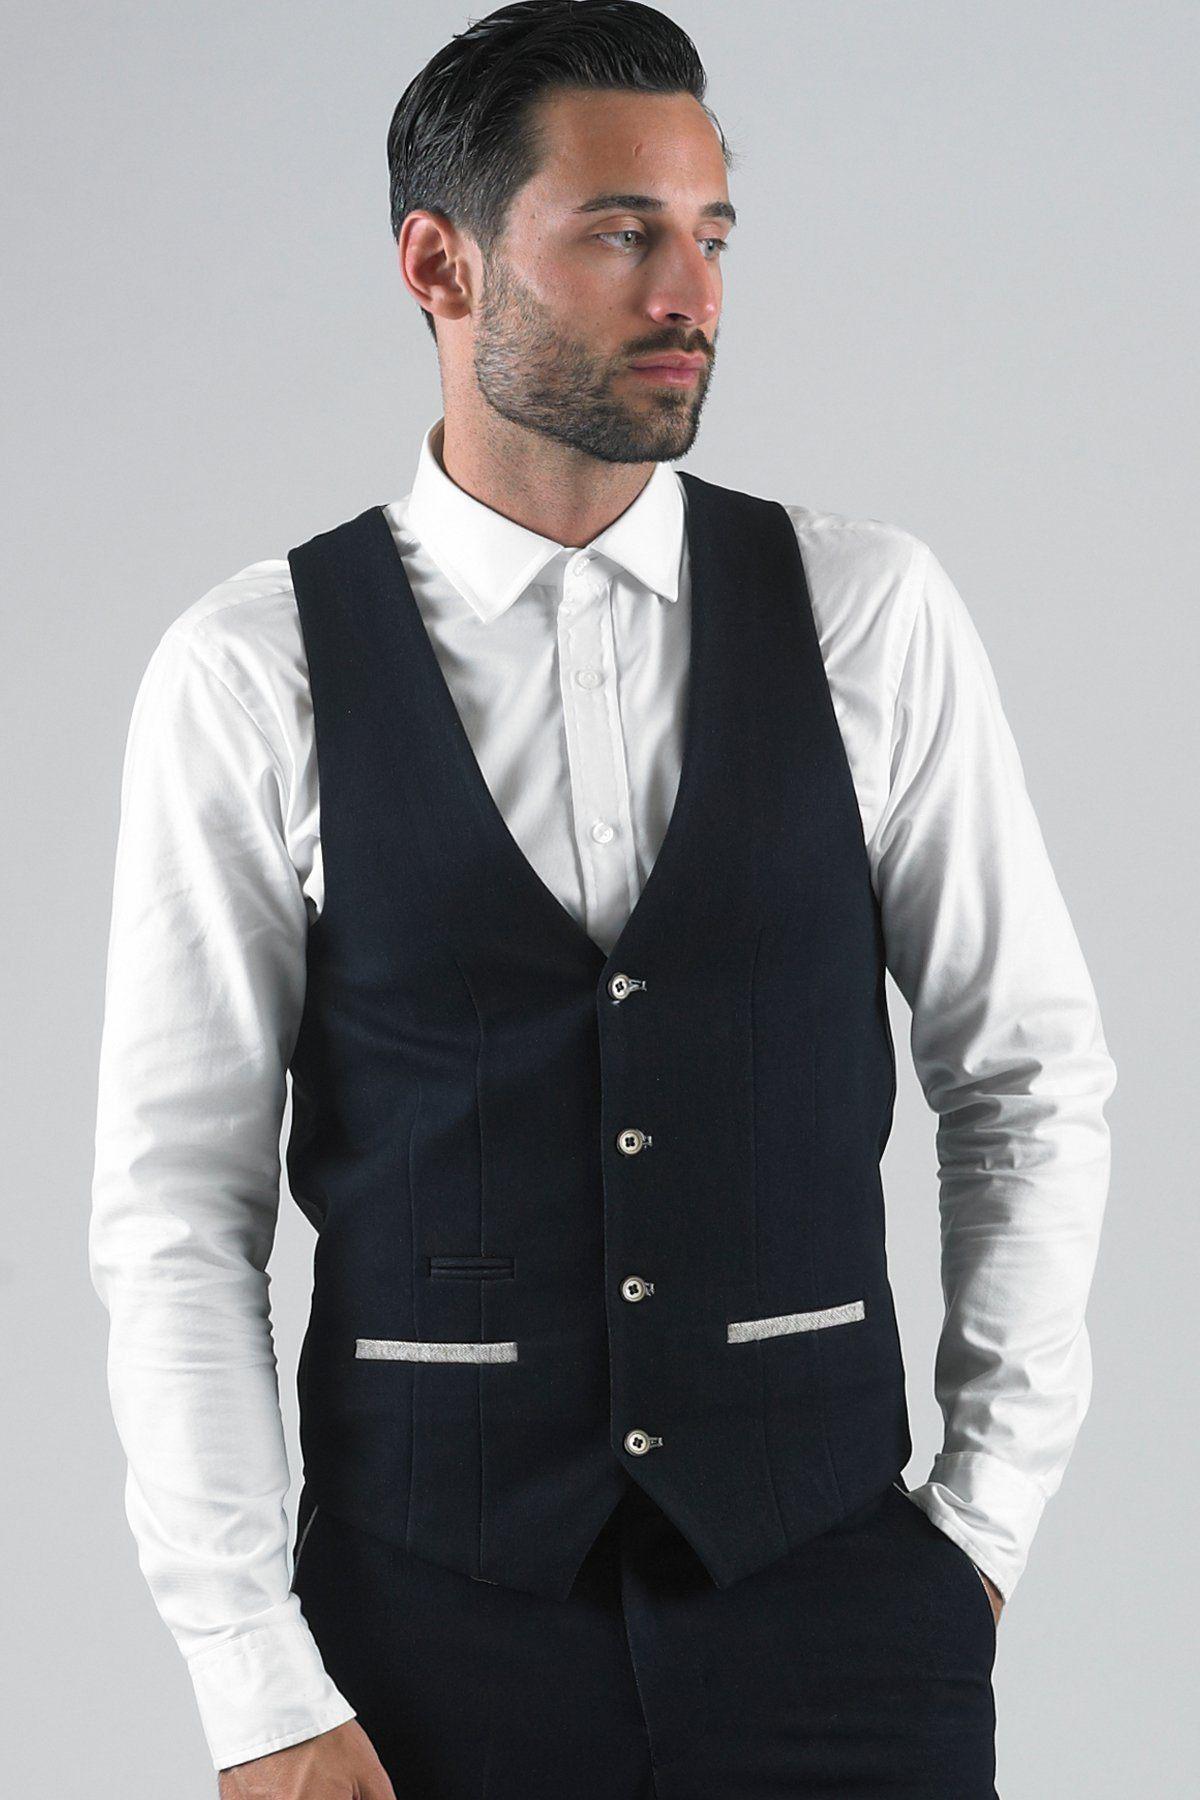 NIANJEEP Mens Plus Size Style Classic Denim Vest Slim Fit Sleeveless Jacket  With Turn Down Collar And Waistcoat In Black 3XL From Zhaolinshe, $21.23 |  DHgate.Com